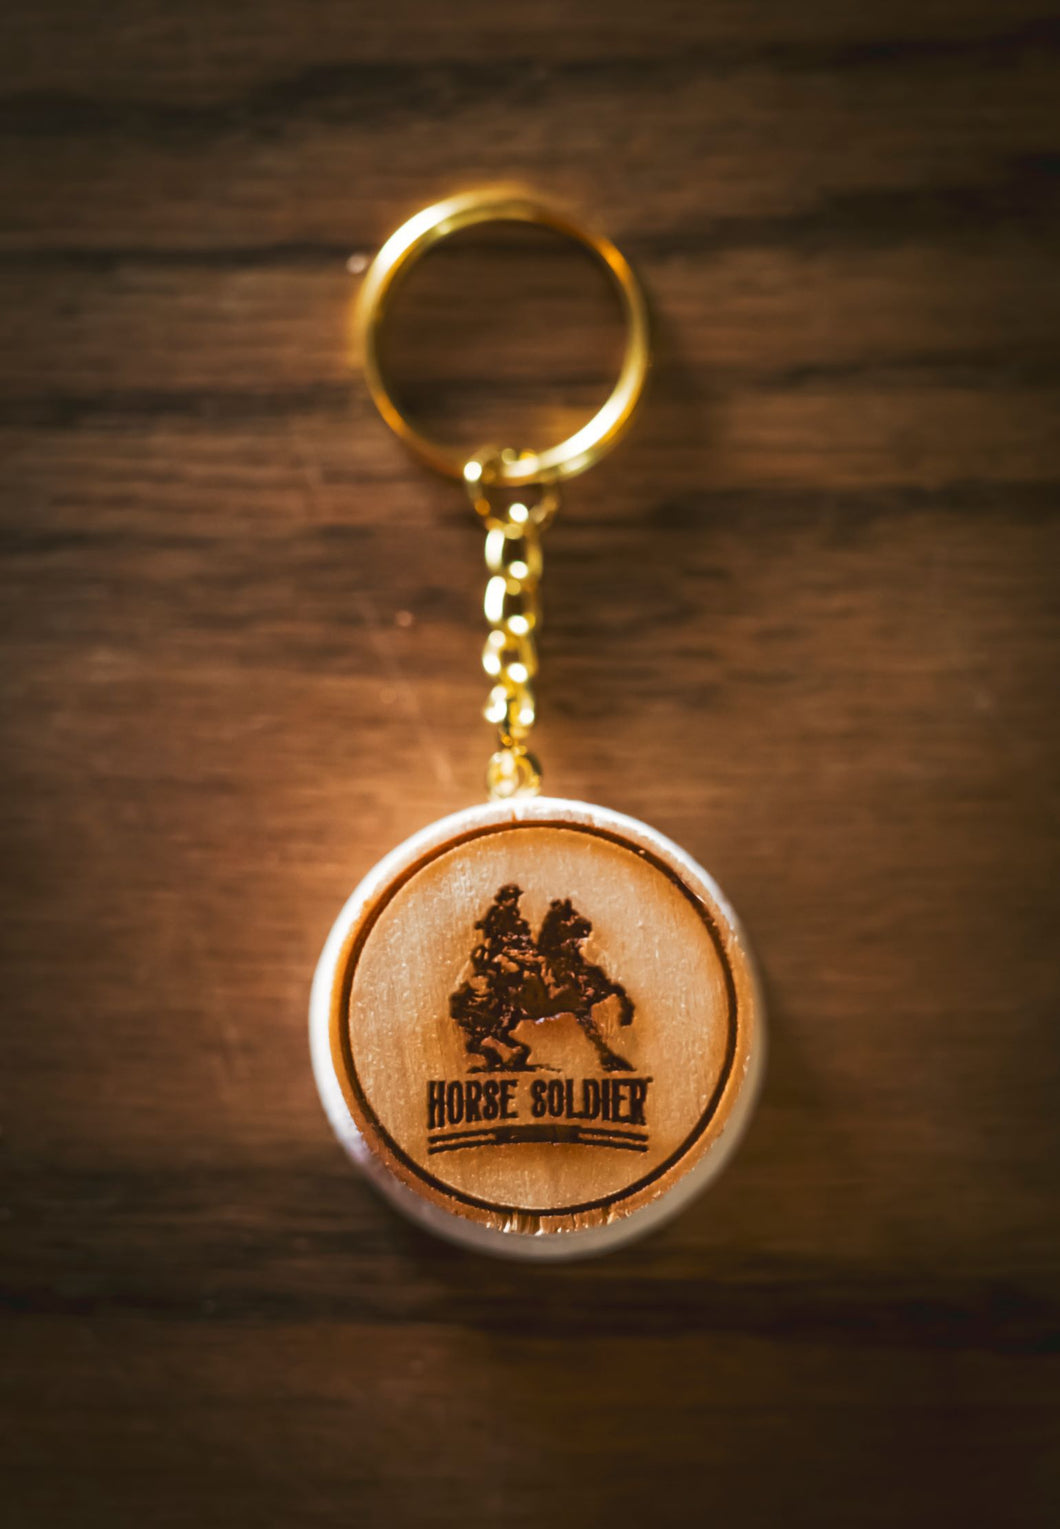 Horse Soldier Key Chain